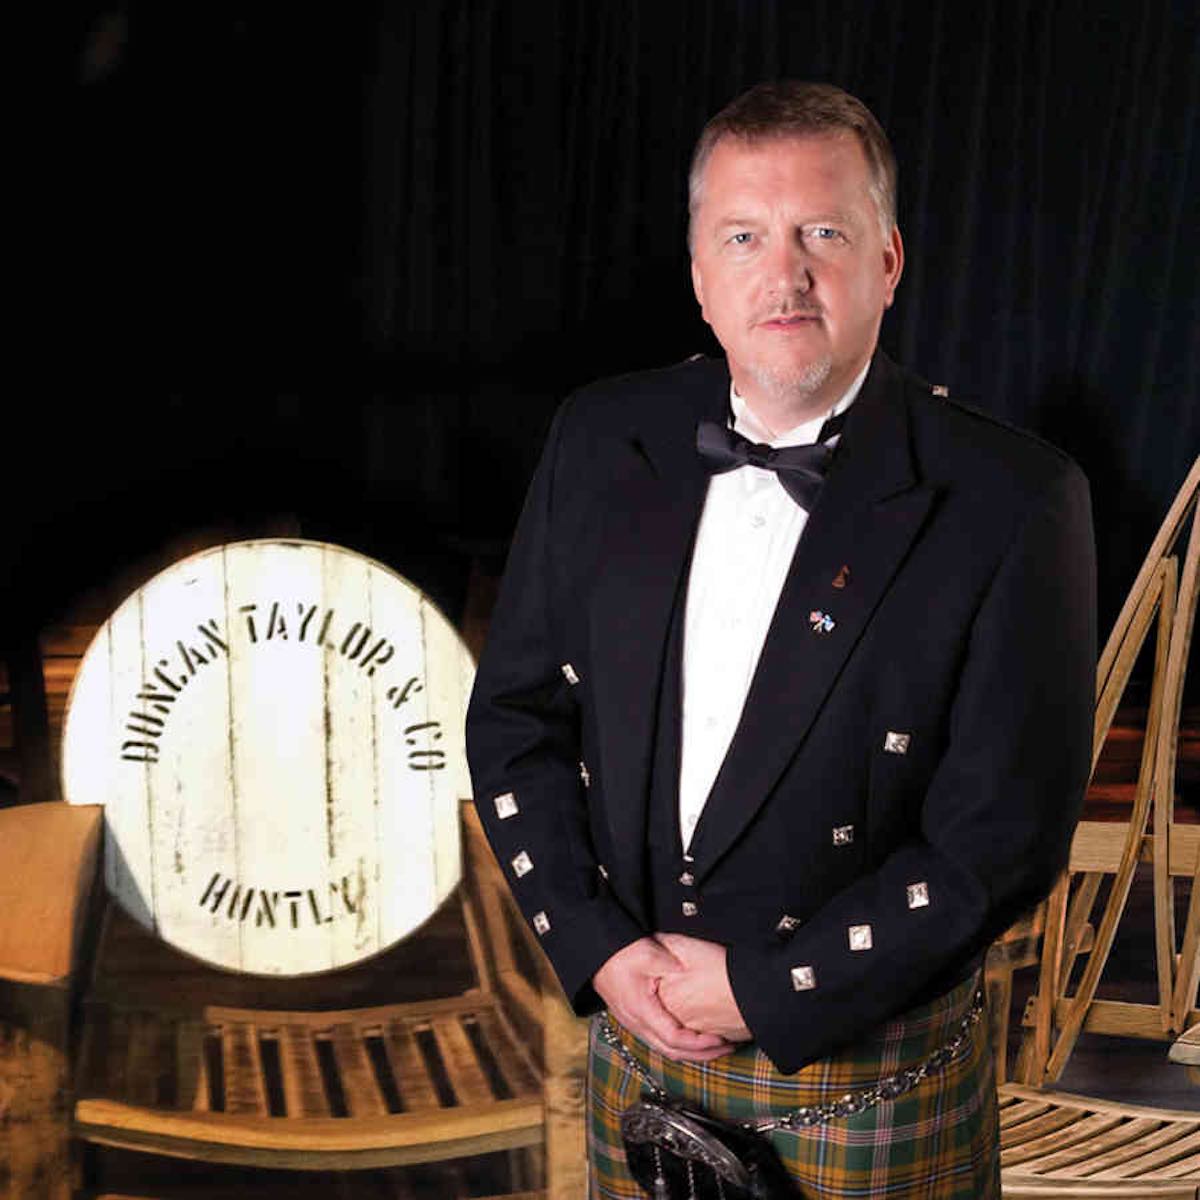 Euan Shand, Chairman of Duncan Taylor Scotch Whisky